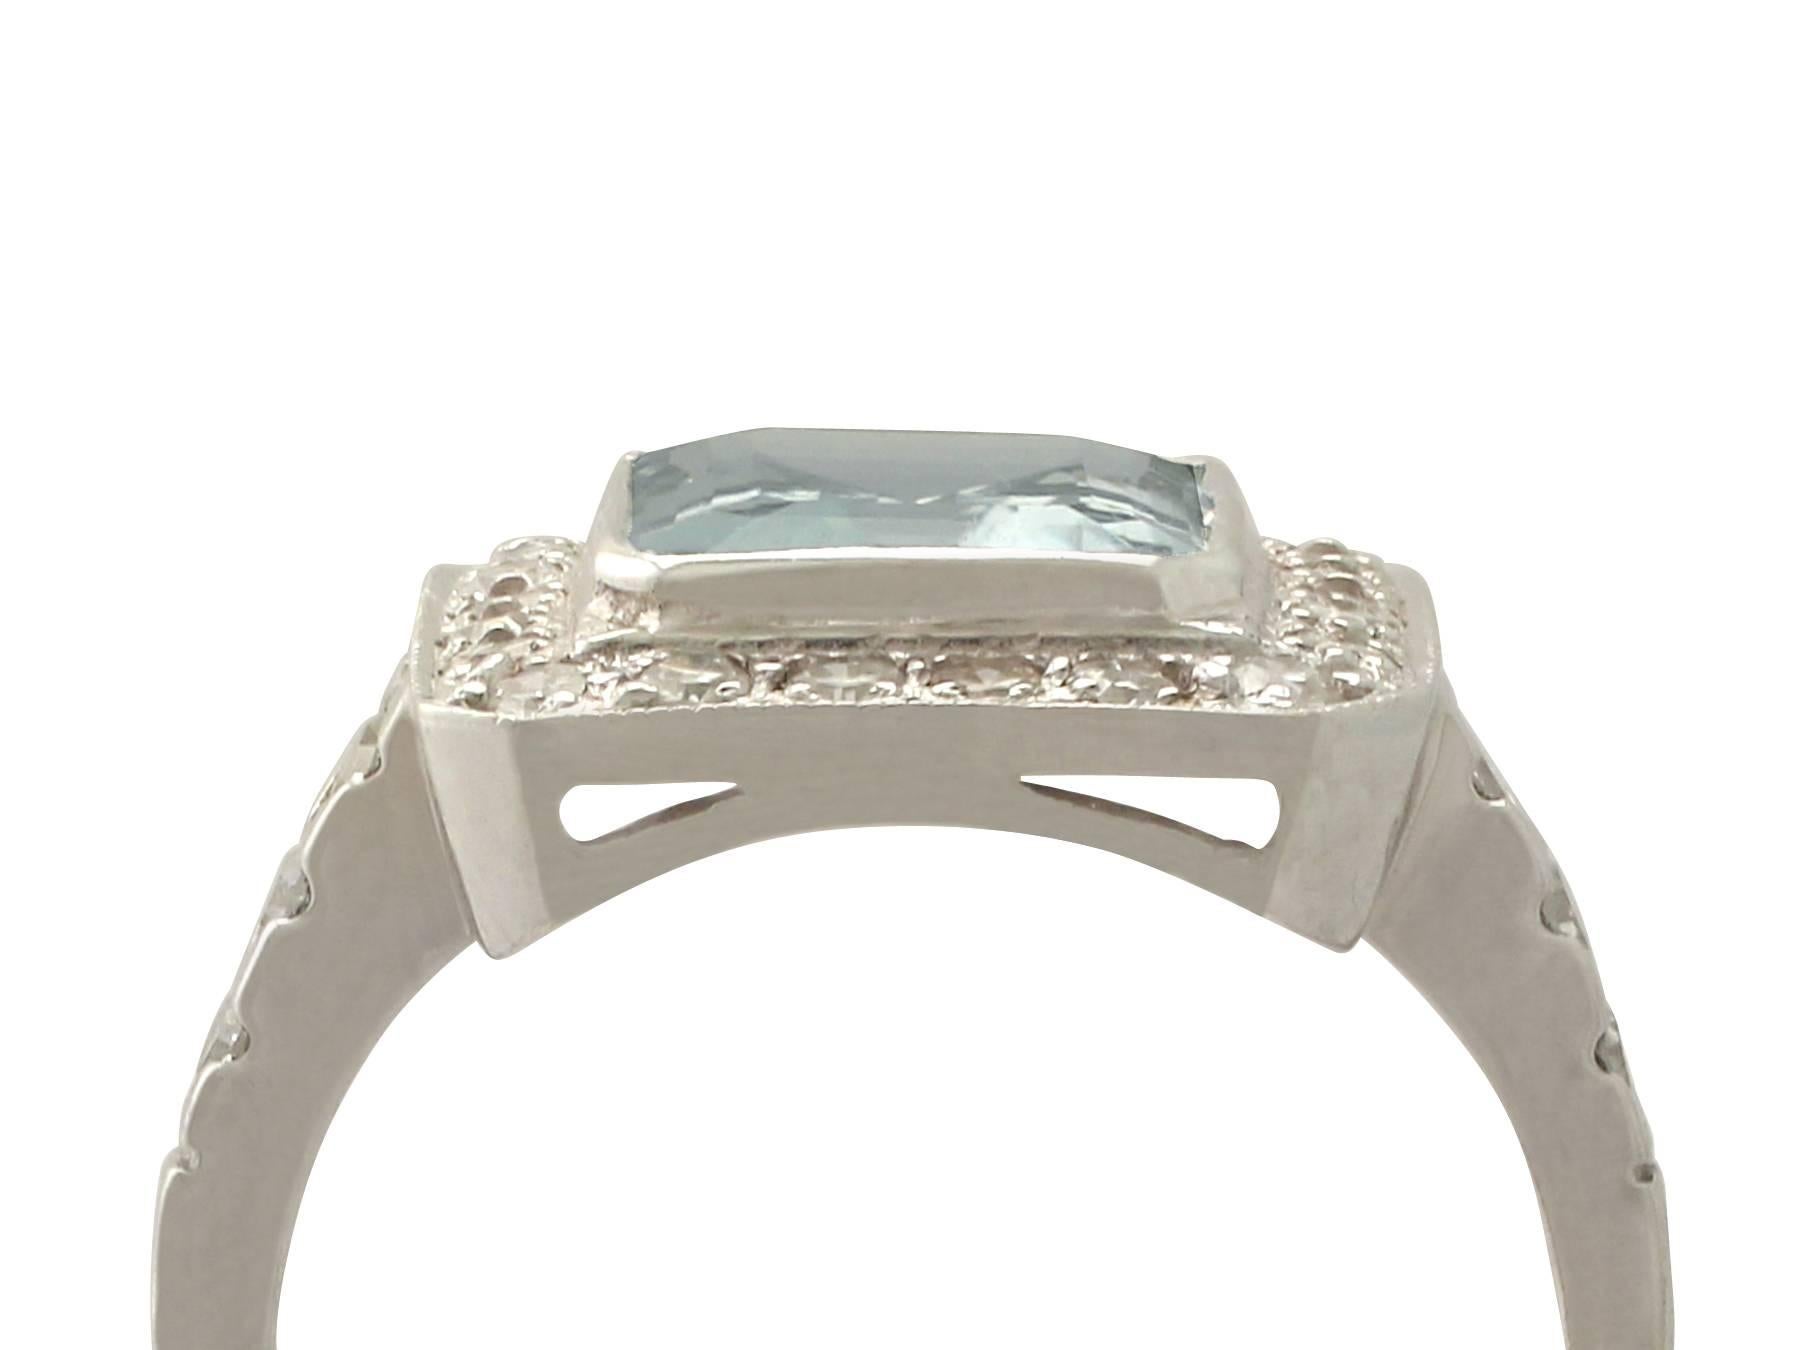 An impressive 2.50 carat aquamarine and 0.52 carat diamond, 18 karat white gold cluster style dress ring; part of our diverse gemstone jewelry collections

This fine and impressive aquamarine and diamond ring has been crafted in 18 k white